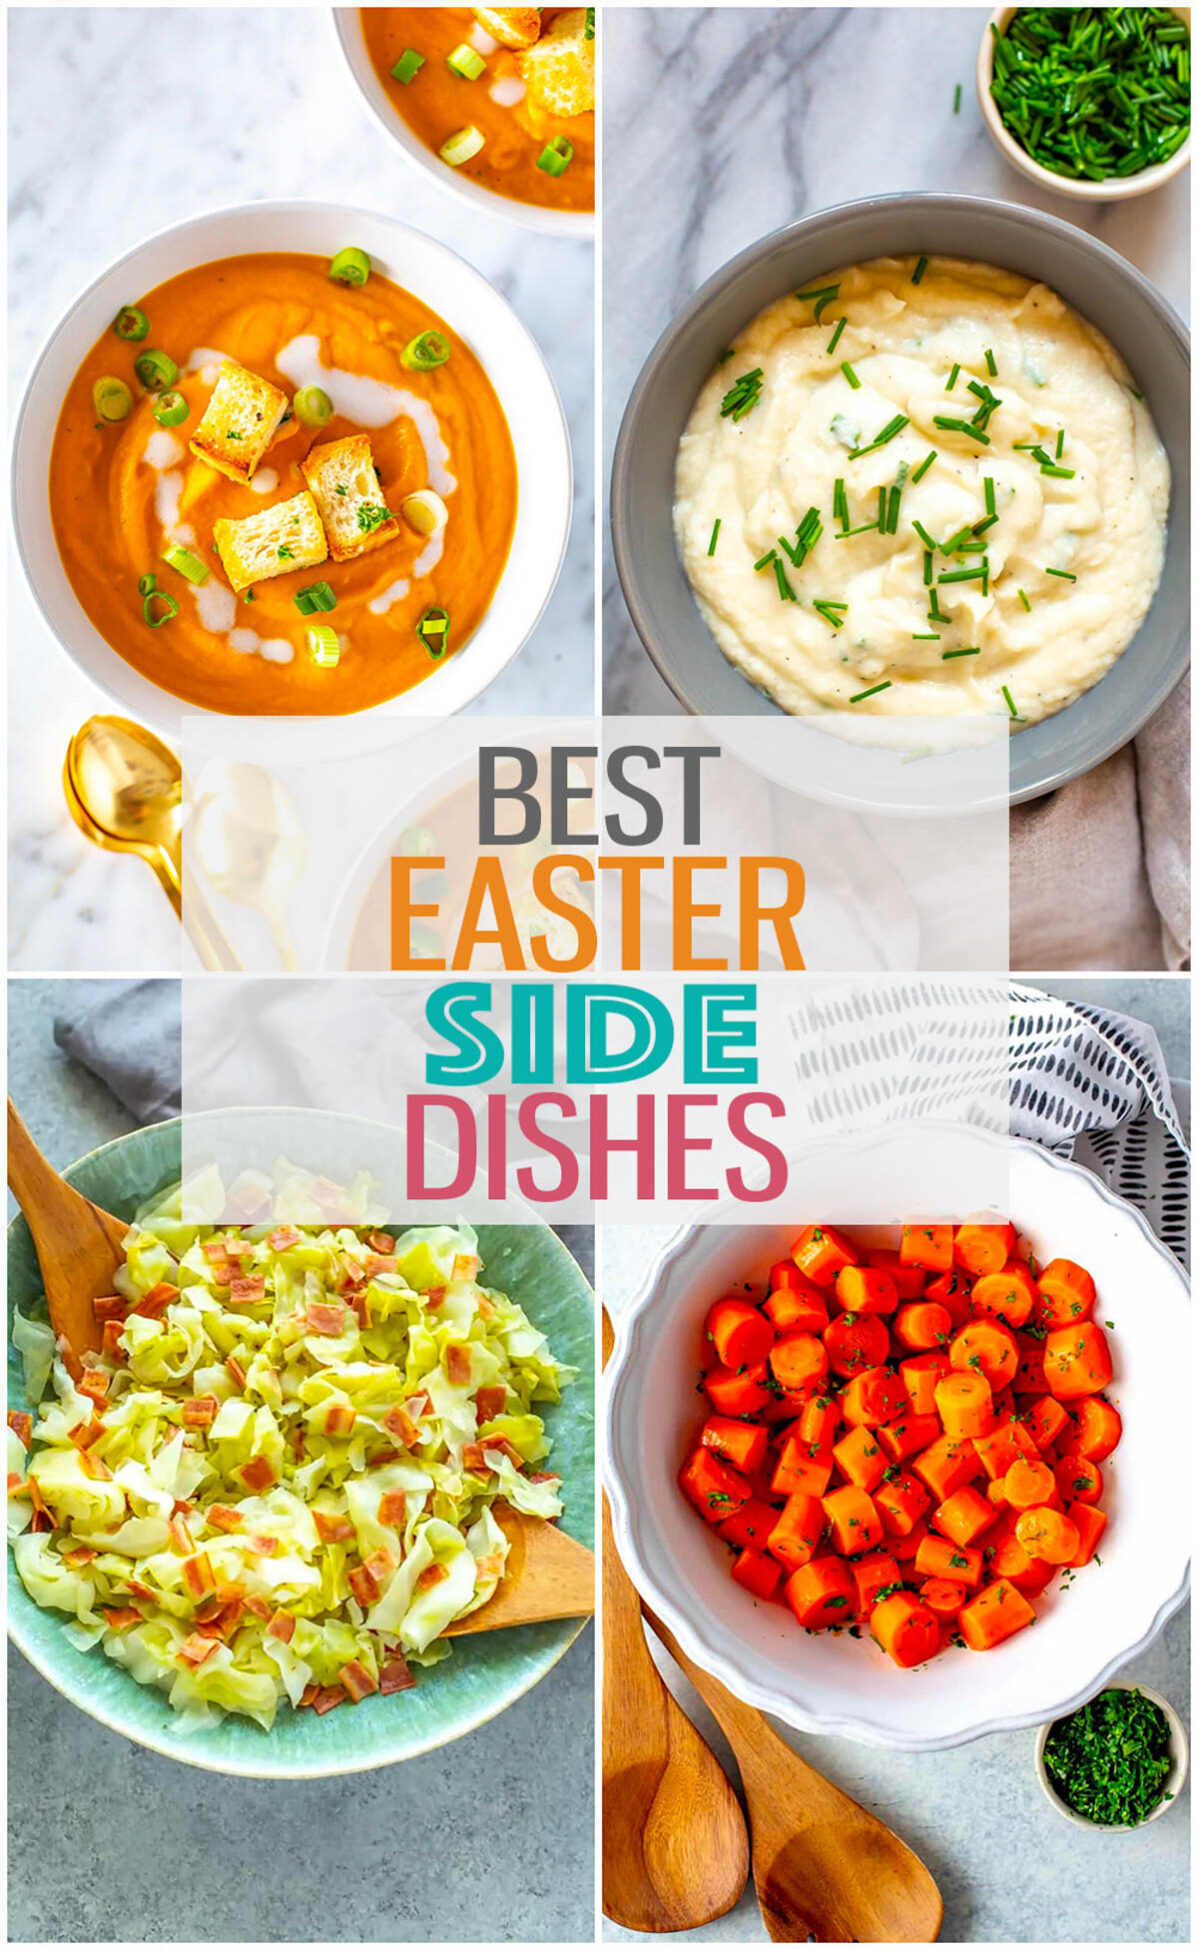 A collage of four Easter side dishes with the text "Best Easter Side Dishes" layered over top.